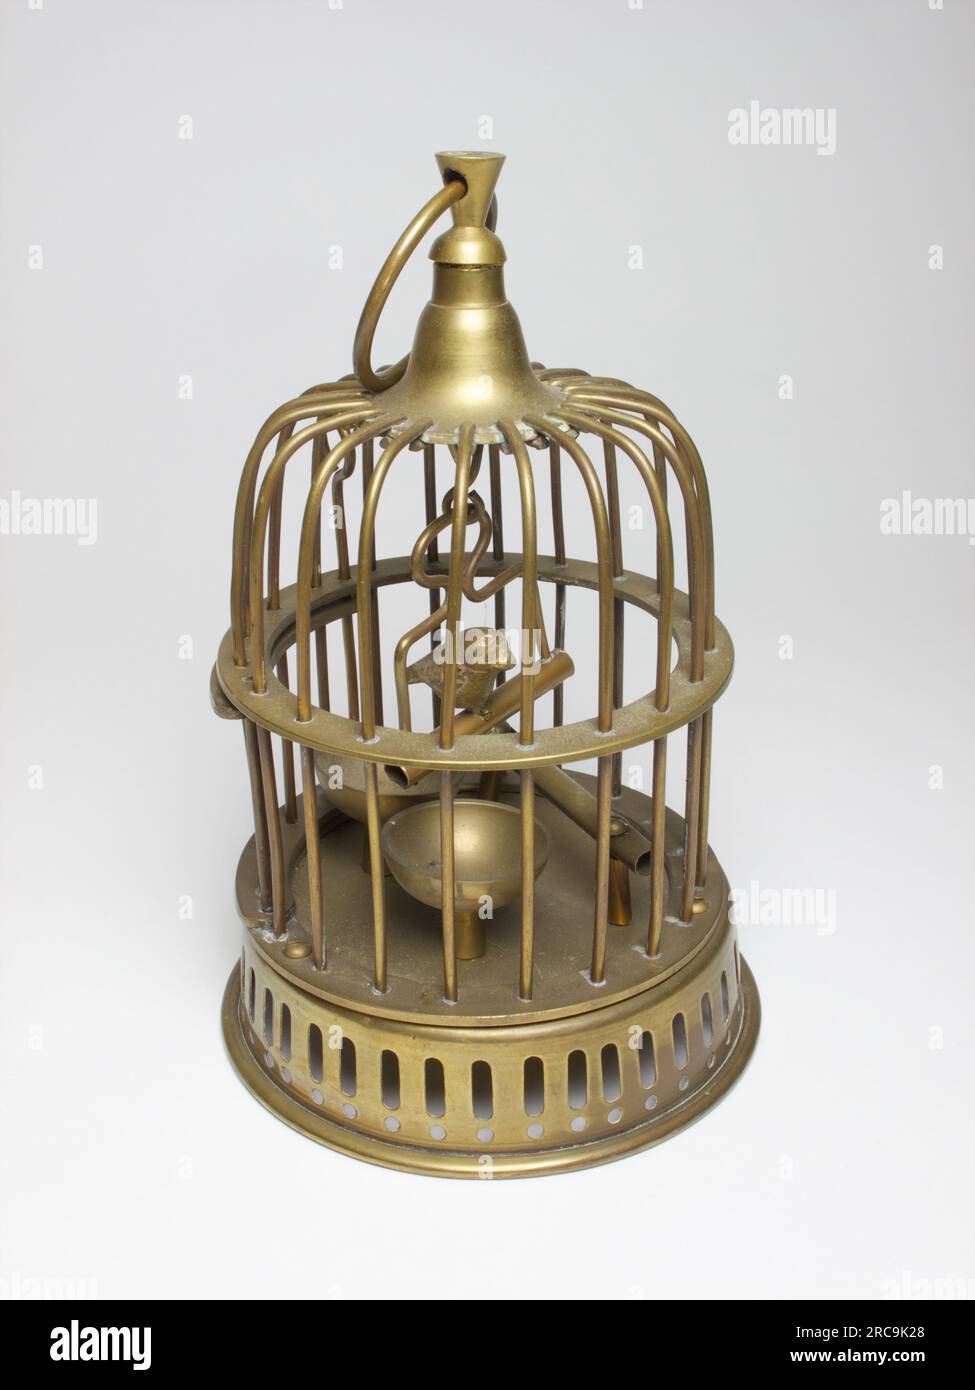 Vintage miniature brass bird cage with opening door and a with a bird sitting on a swing. The cage measures approximately 17.5cm high. The photographs Stock Photo